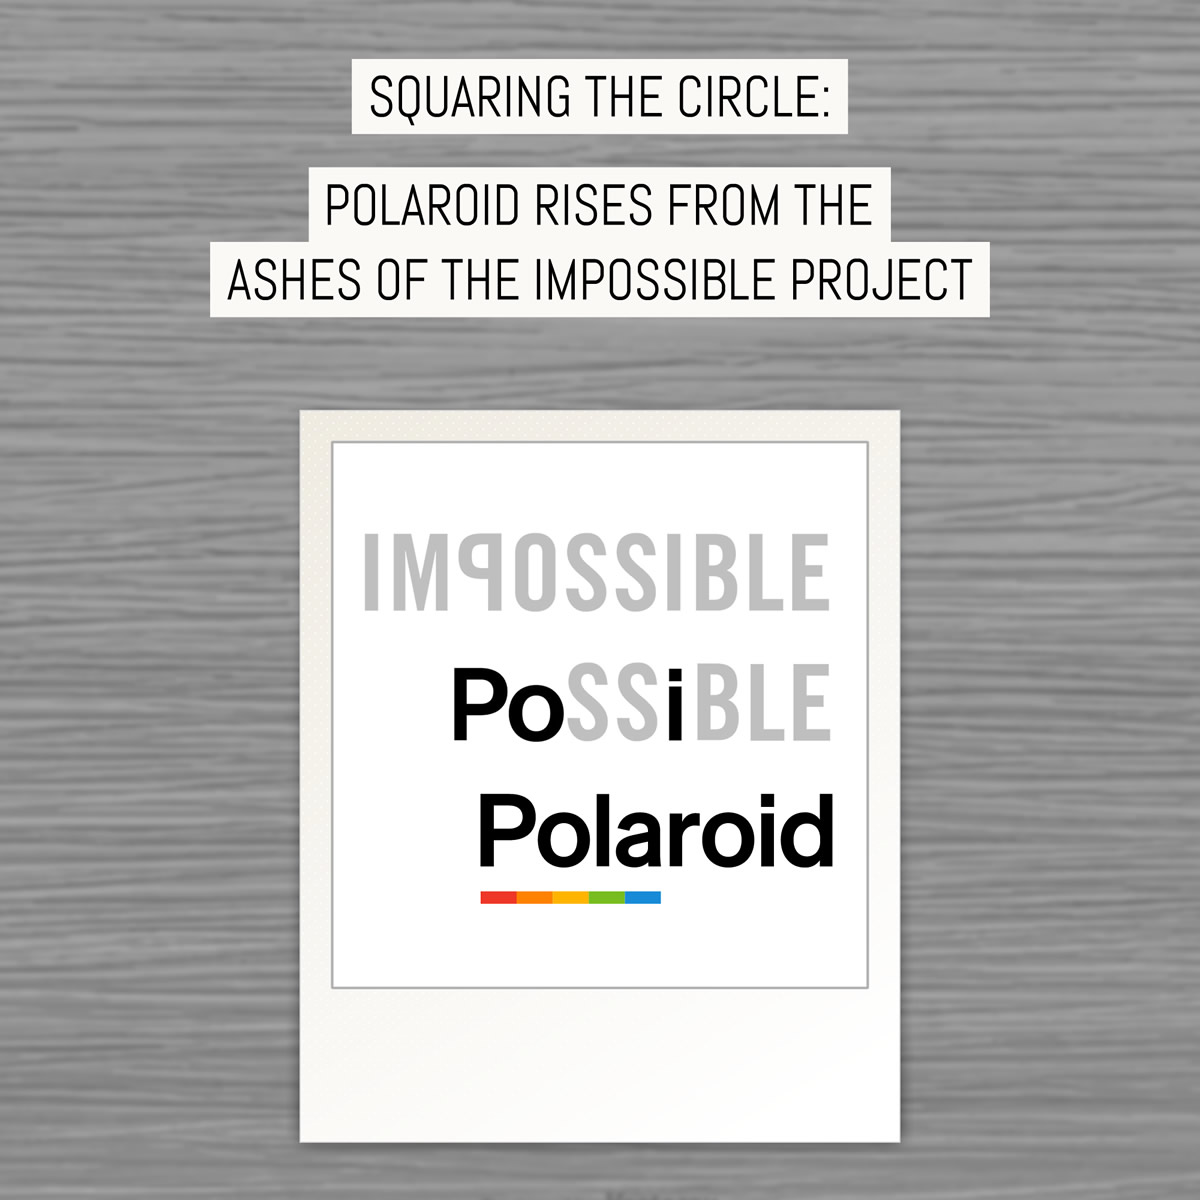 Squaring the circle: Polaroid rises from the ashes of The Impossible Project